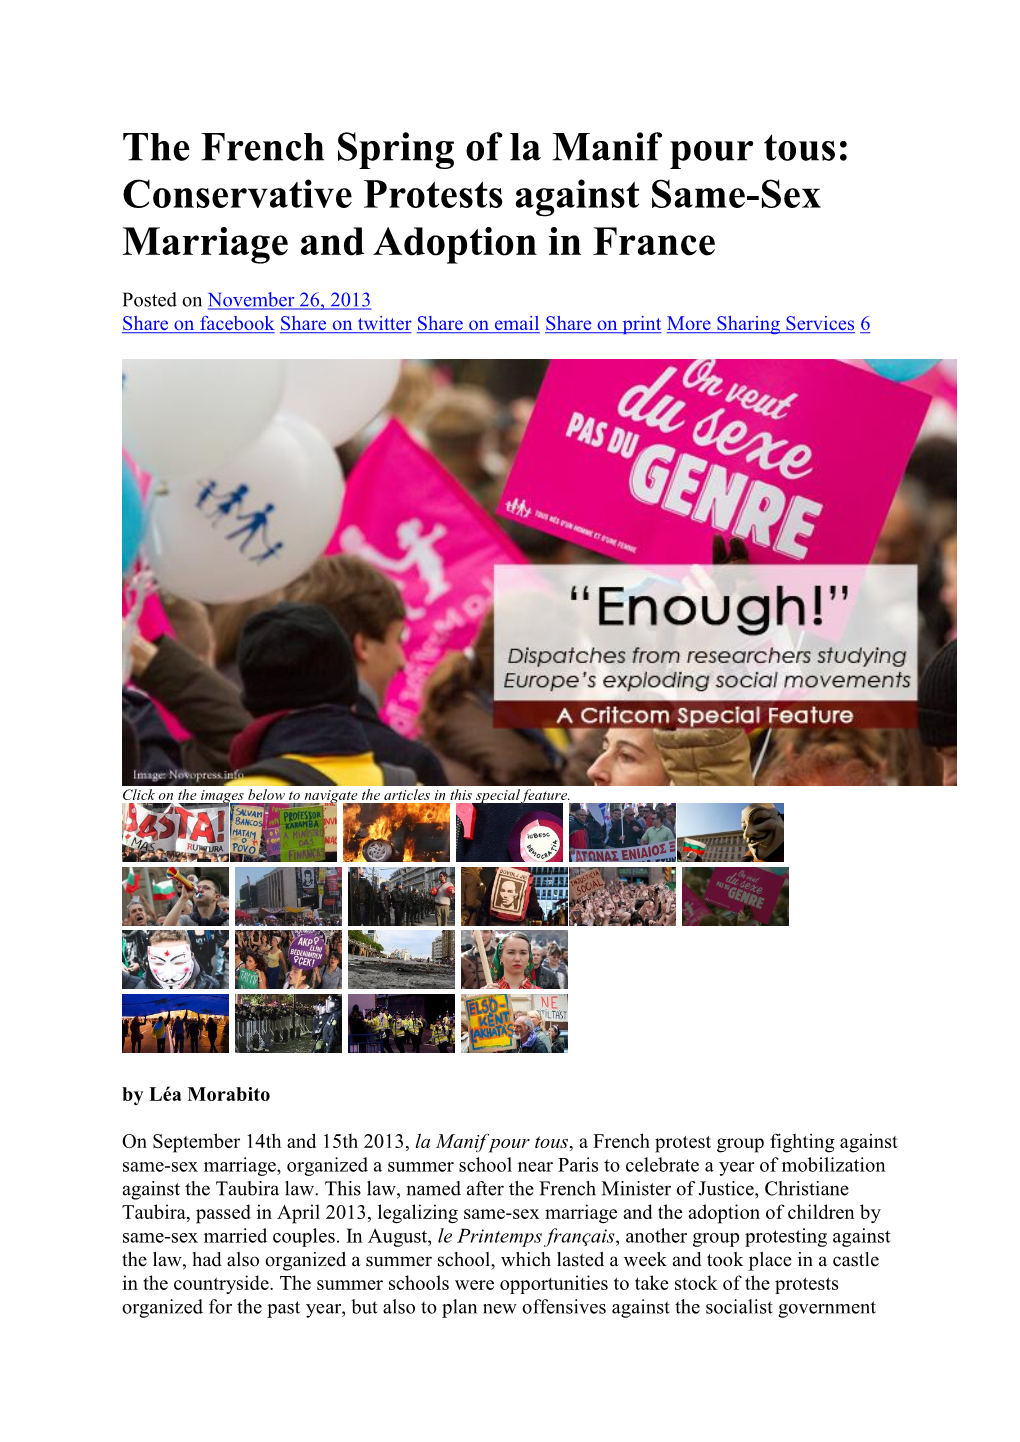 The French Spring of La Manif Pour Tous: Conservative Protests Against Same-Sex Marriage and Adoption in France